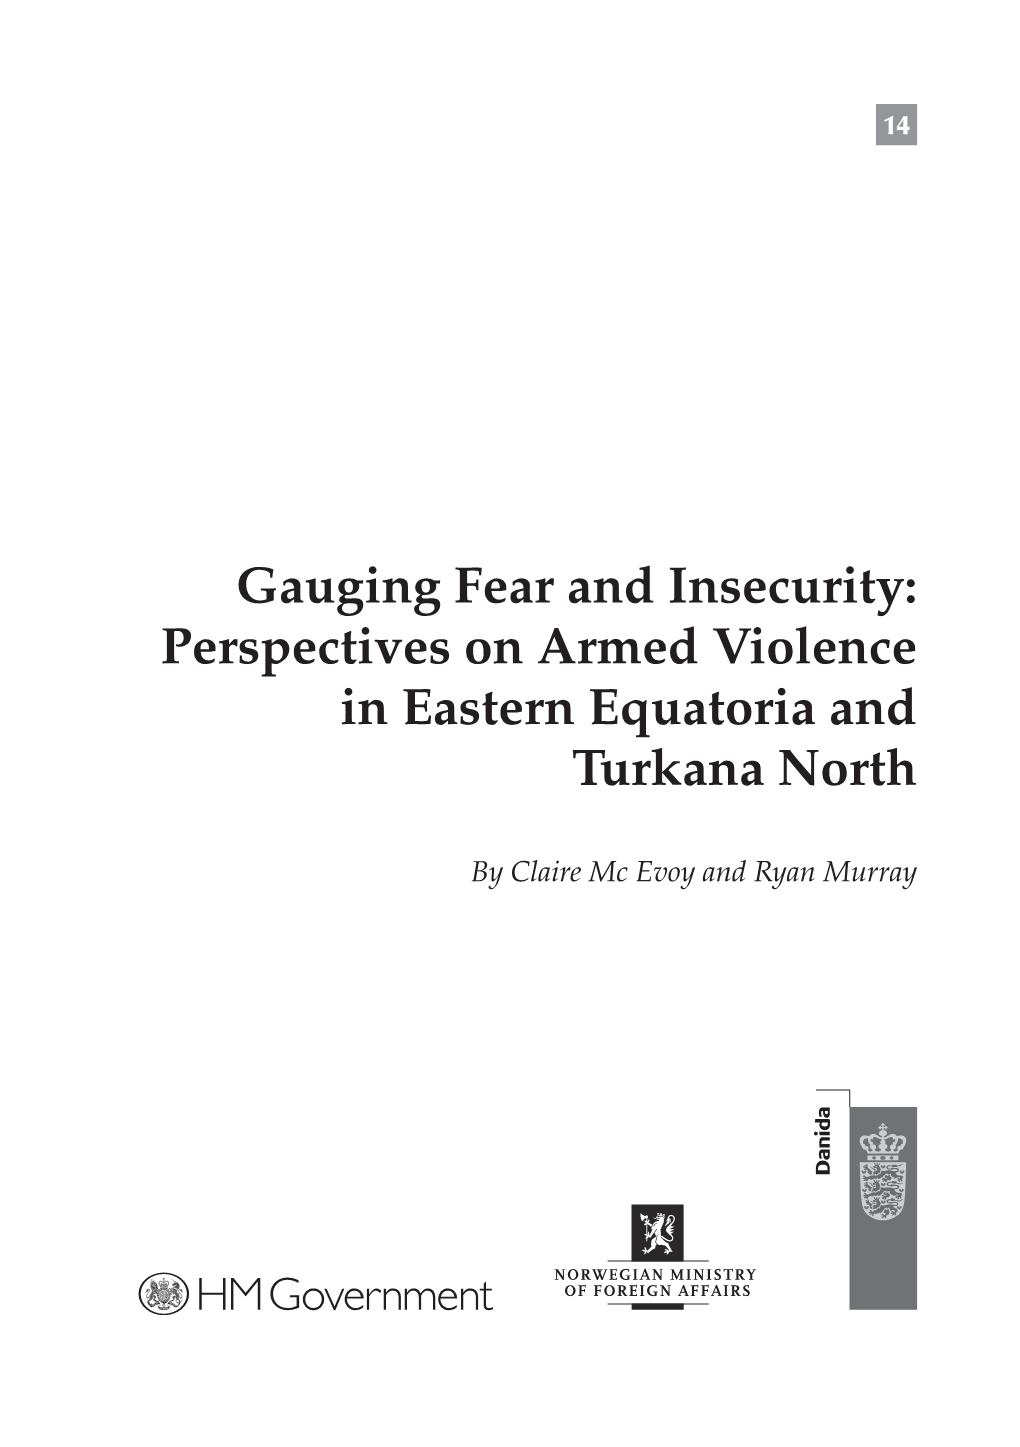 Perspectives on Armed Violence in Eastern Equatoria and Turkana North